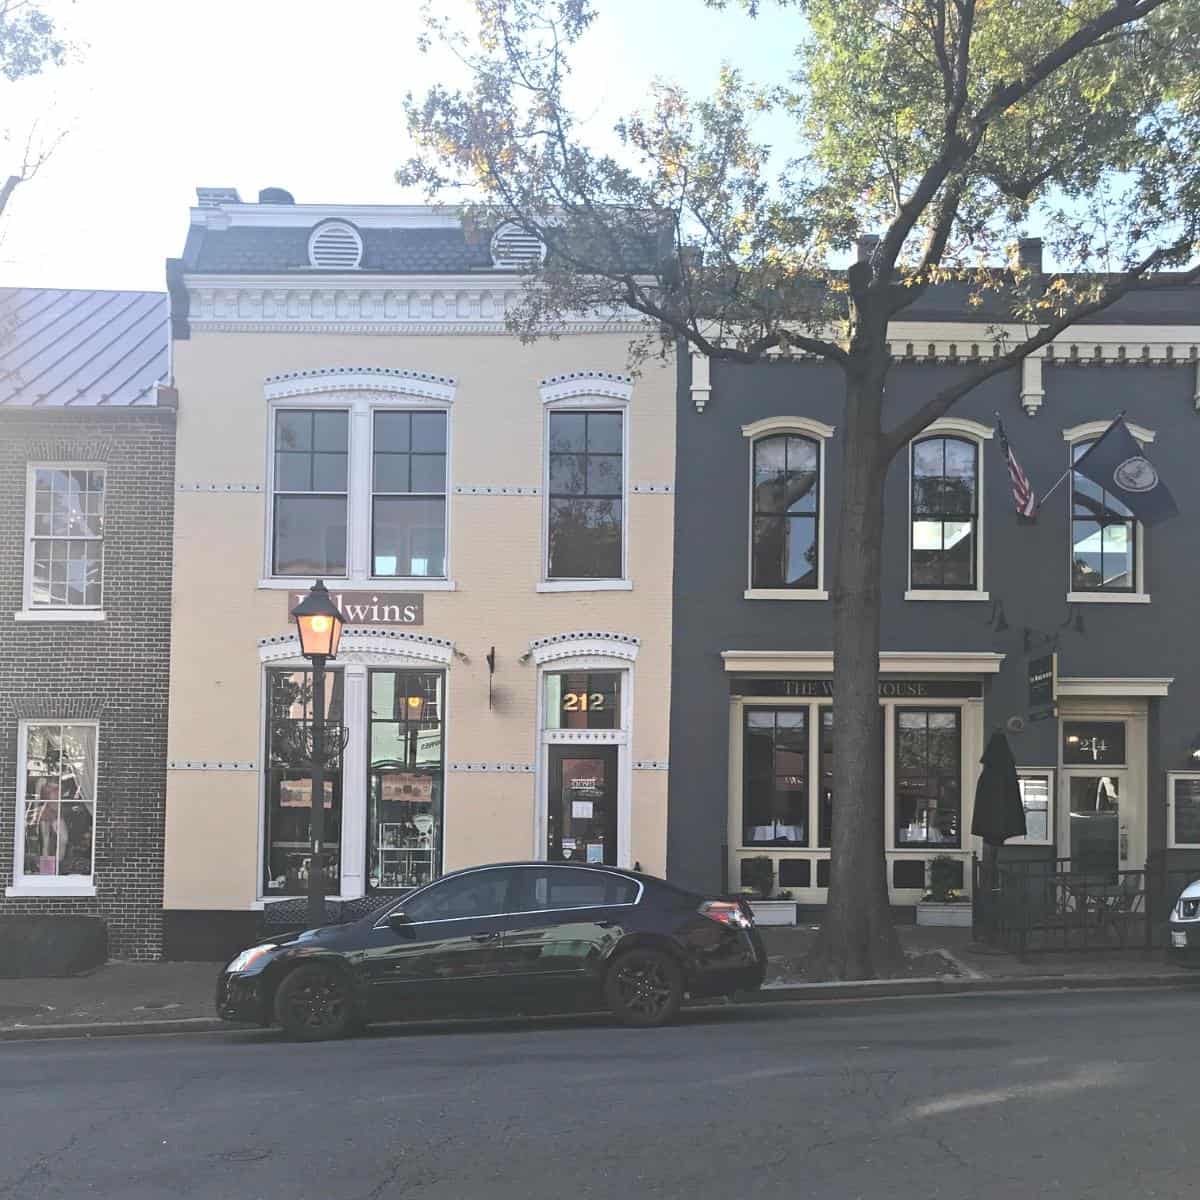 Quaint downtown with local retails shops on a cobblestone street